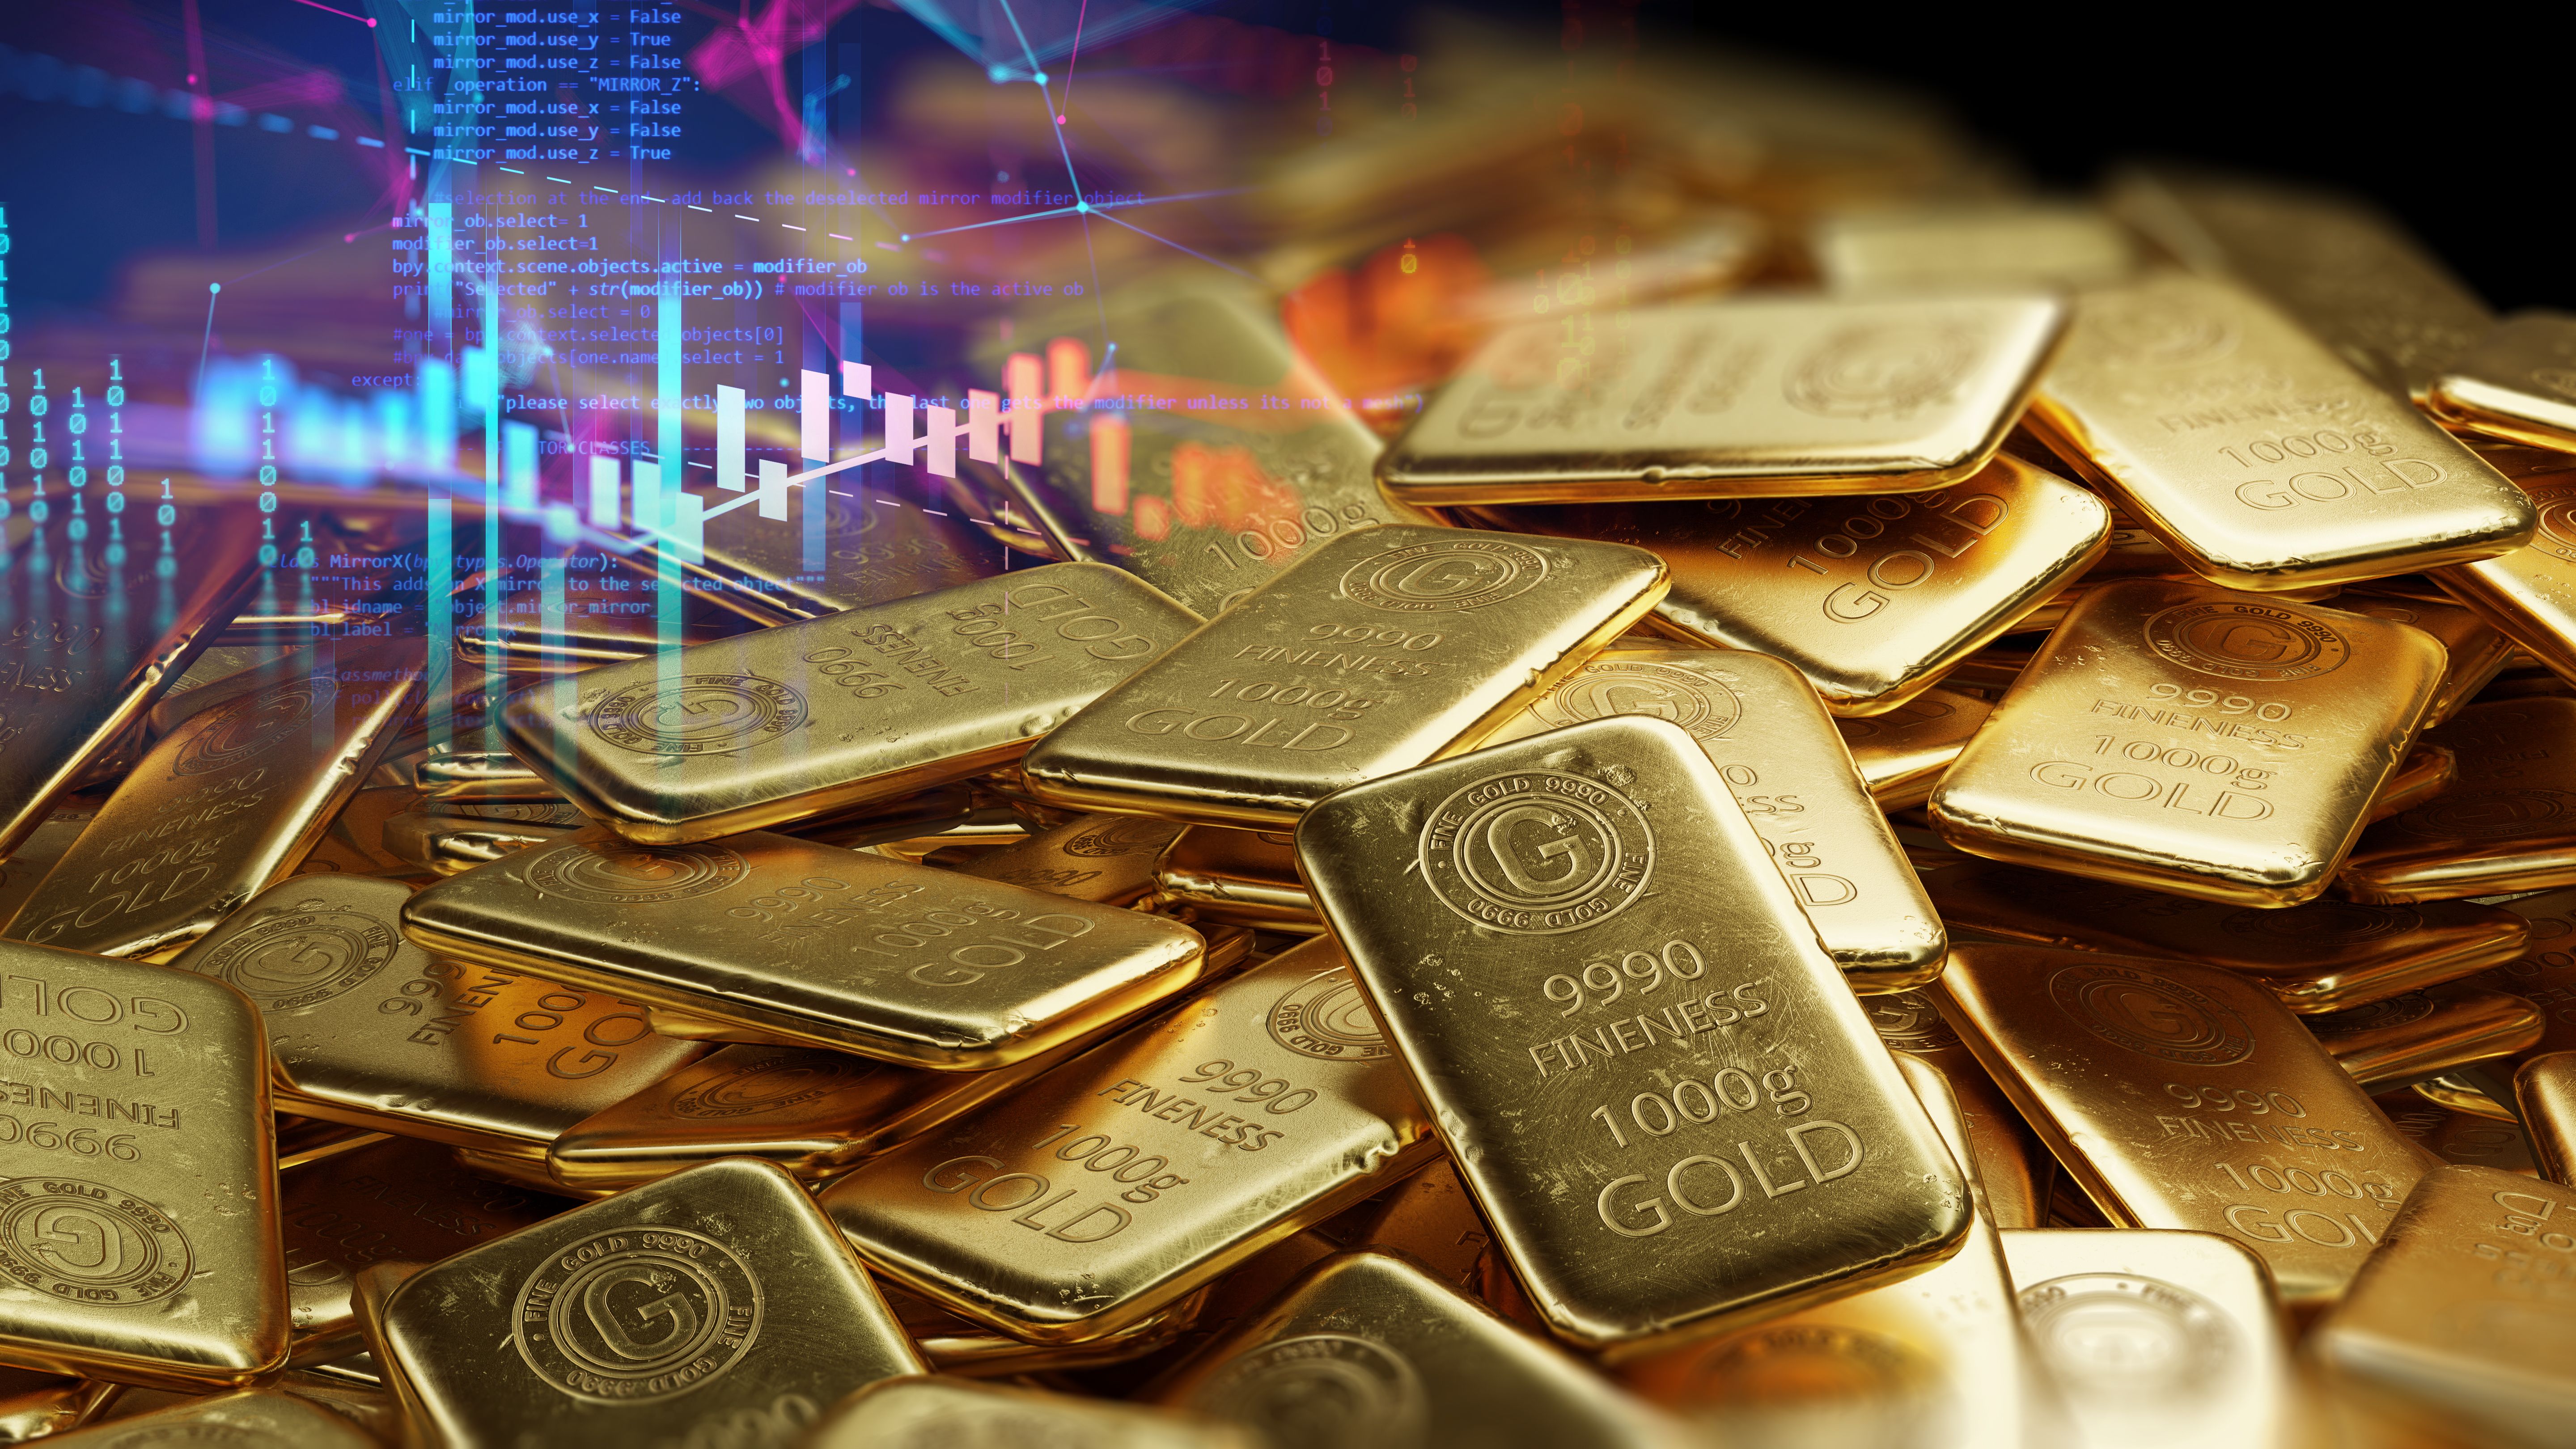 Gold bars against an investment background